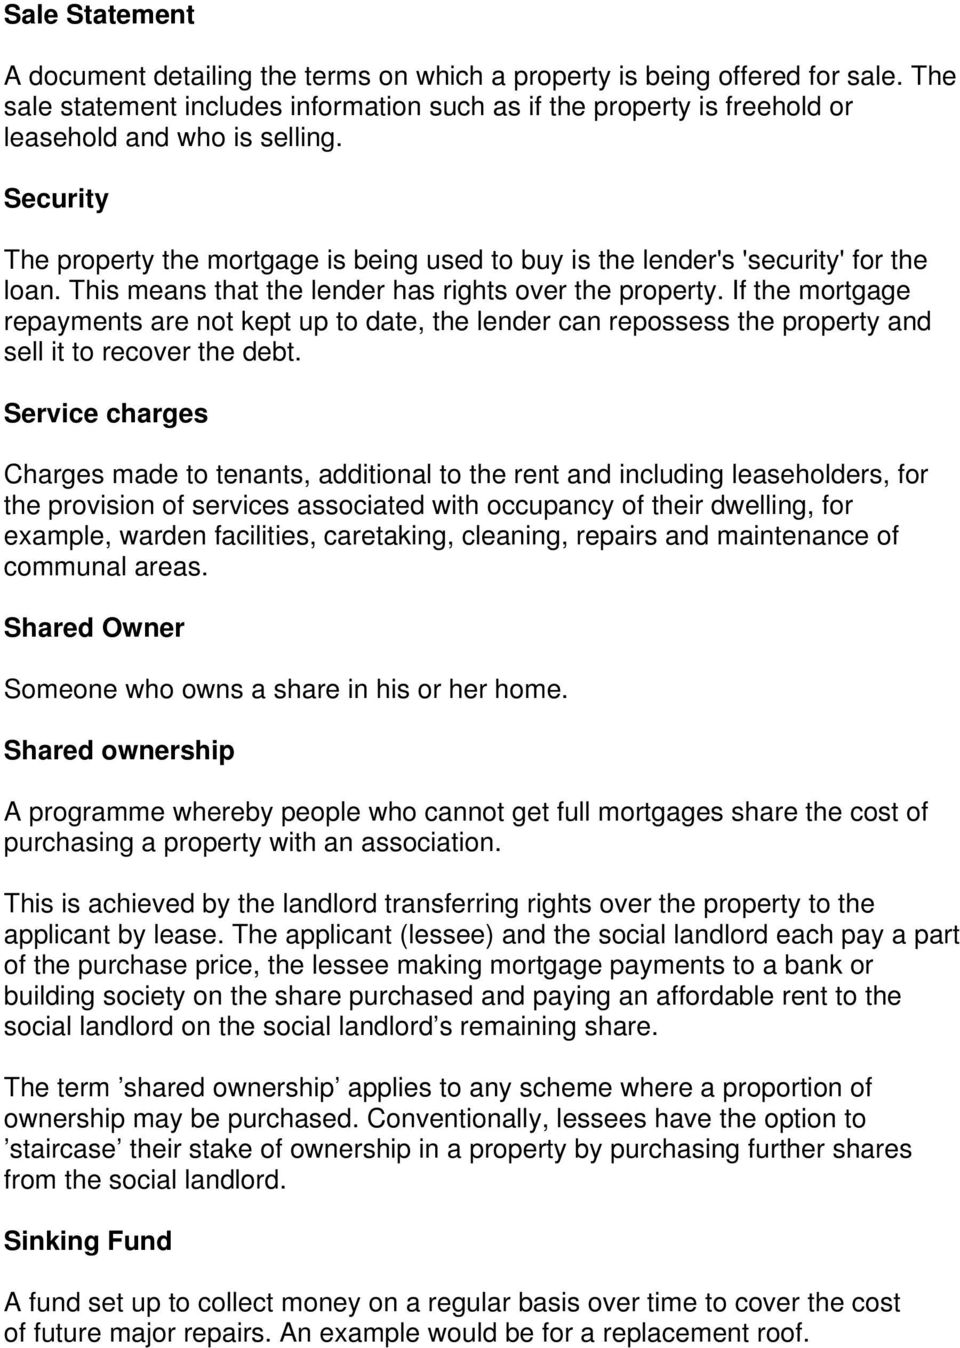 Security The property the mortgage is being used to buy is the lender's 'security' for the loan. This means that the lender has rights over the property.